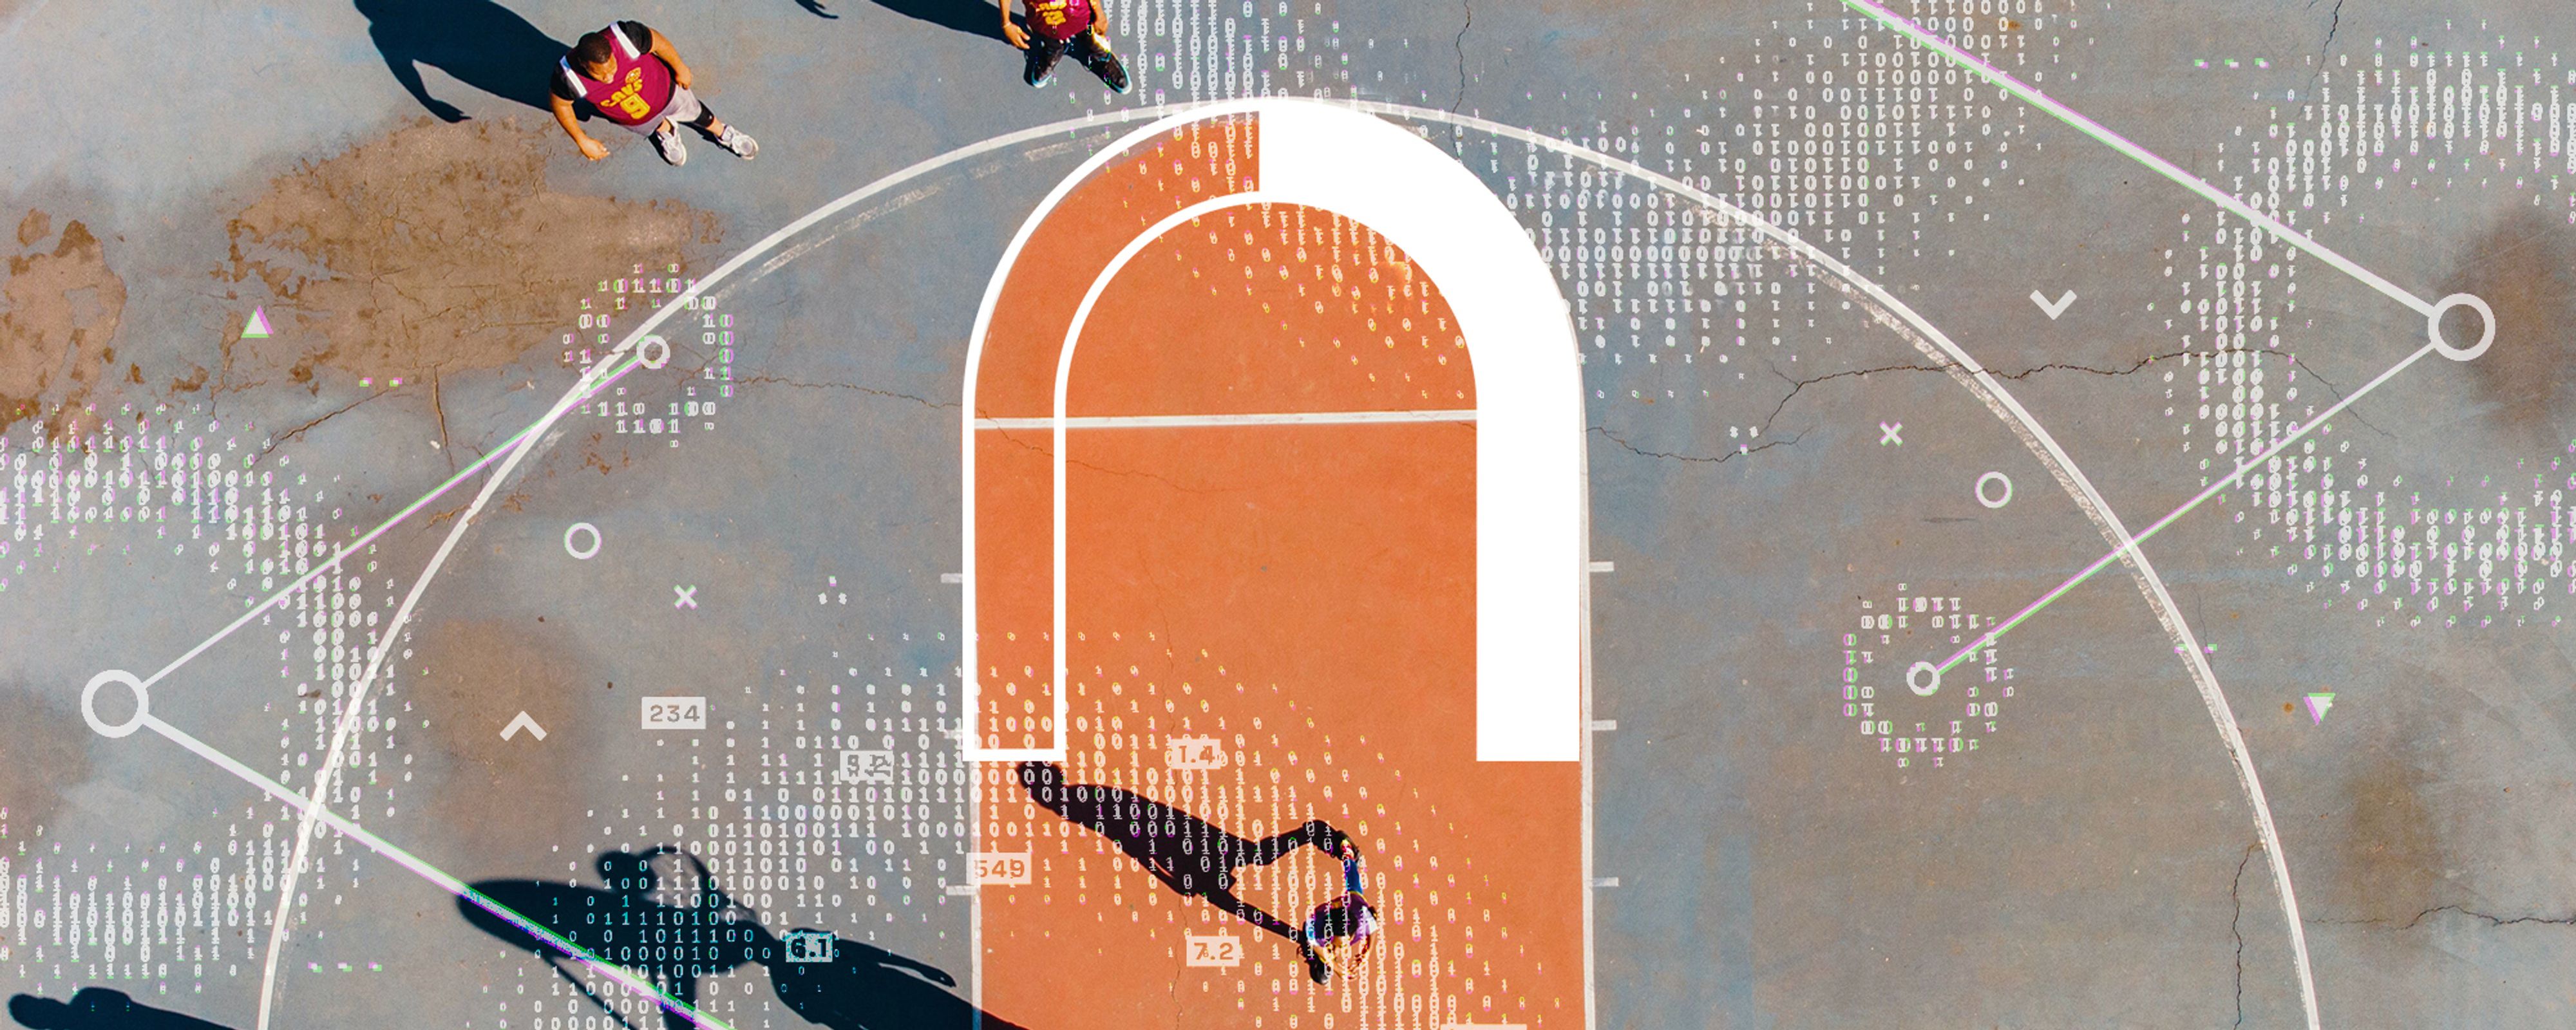 A basketball court is overlaid with digitized circles and lines 